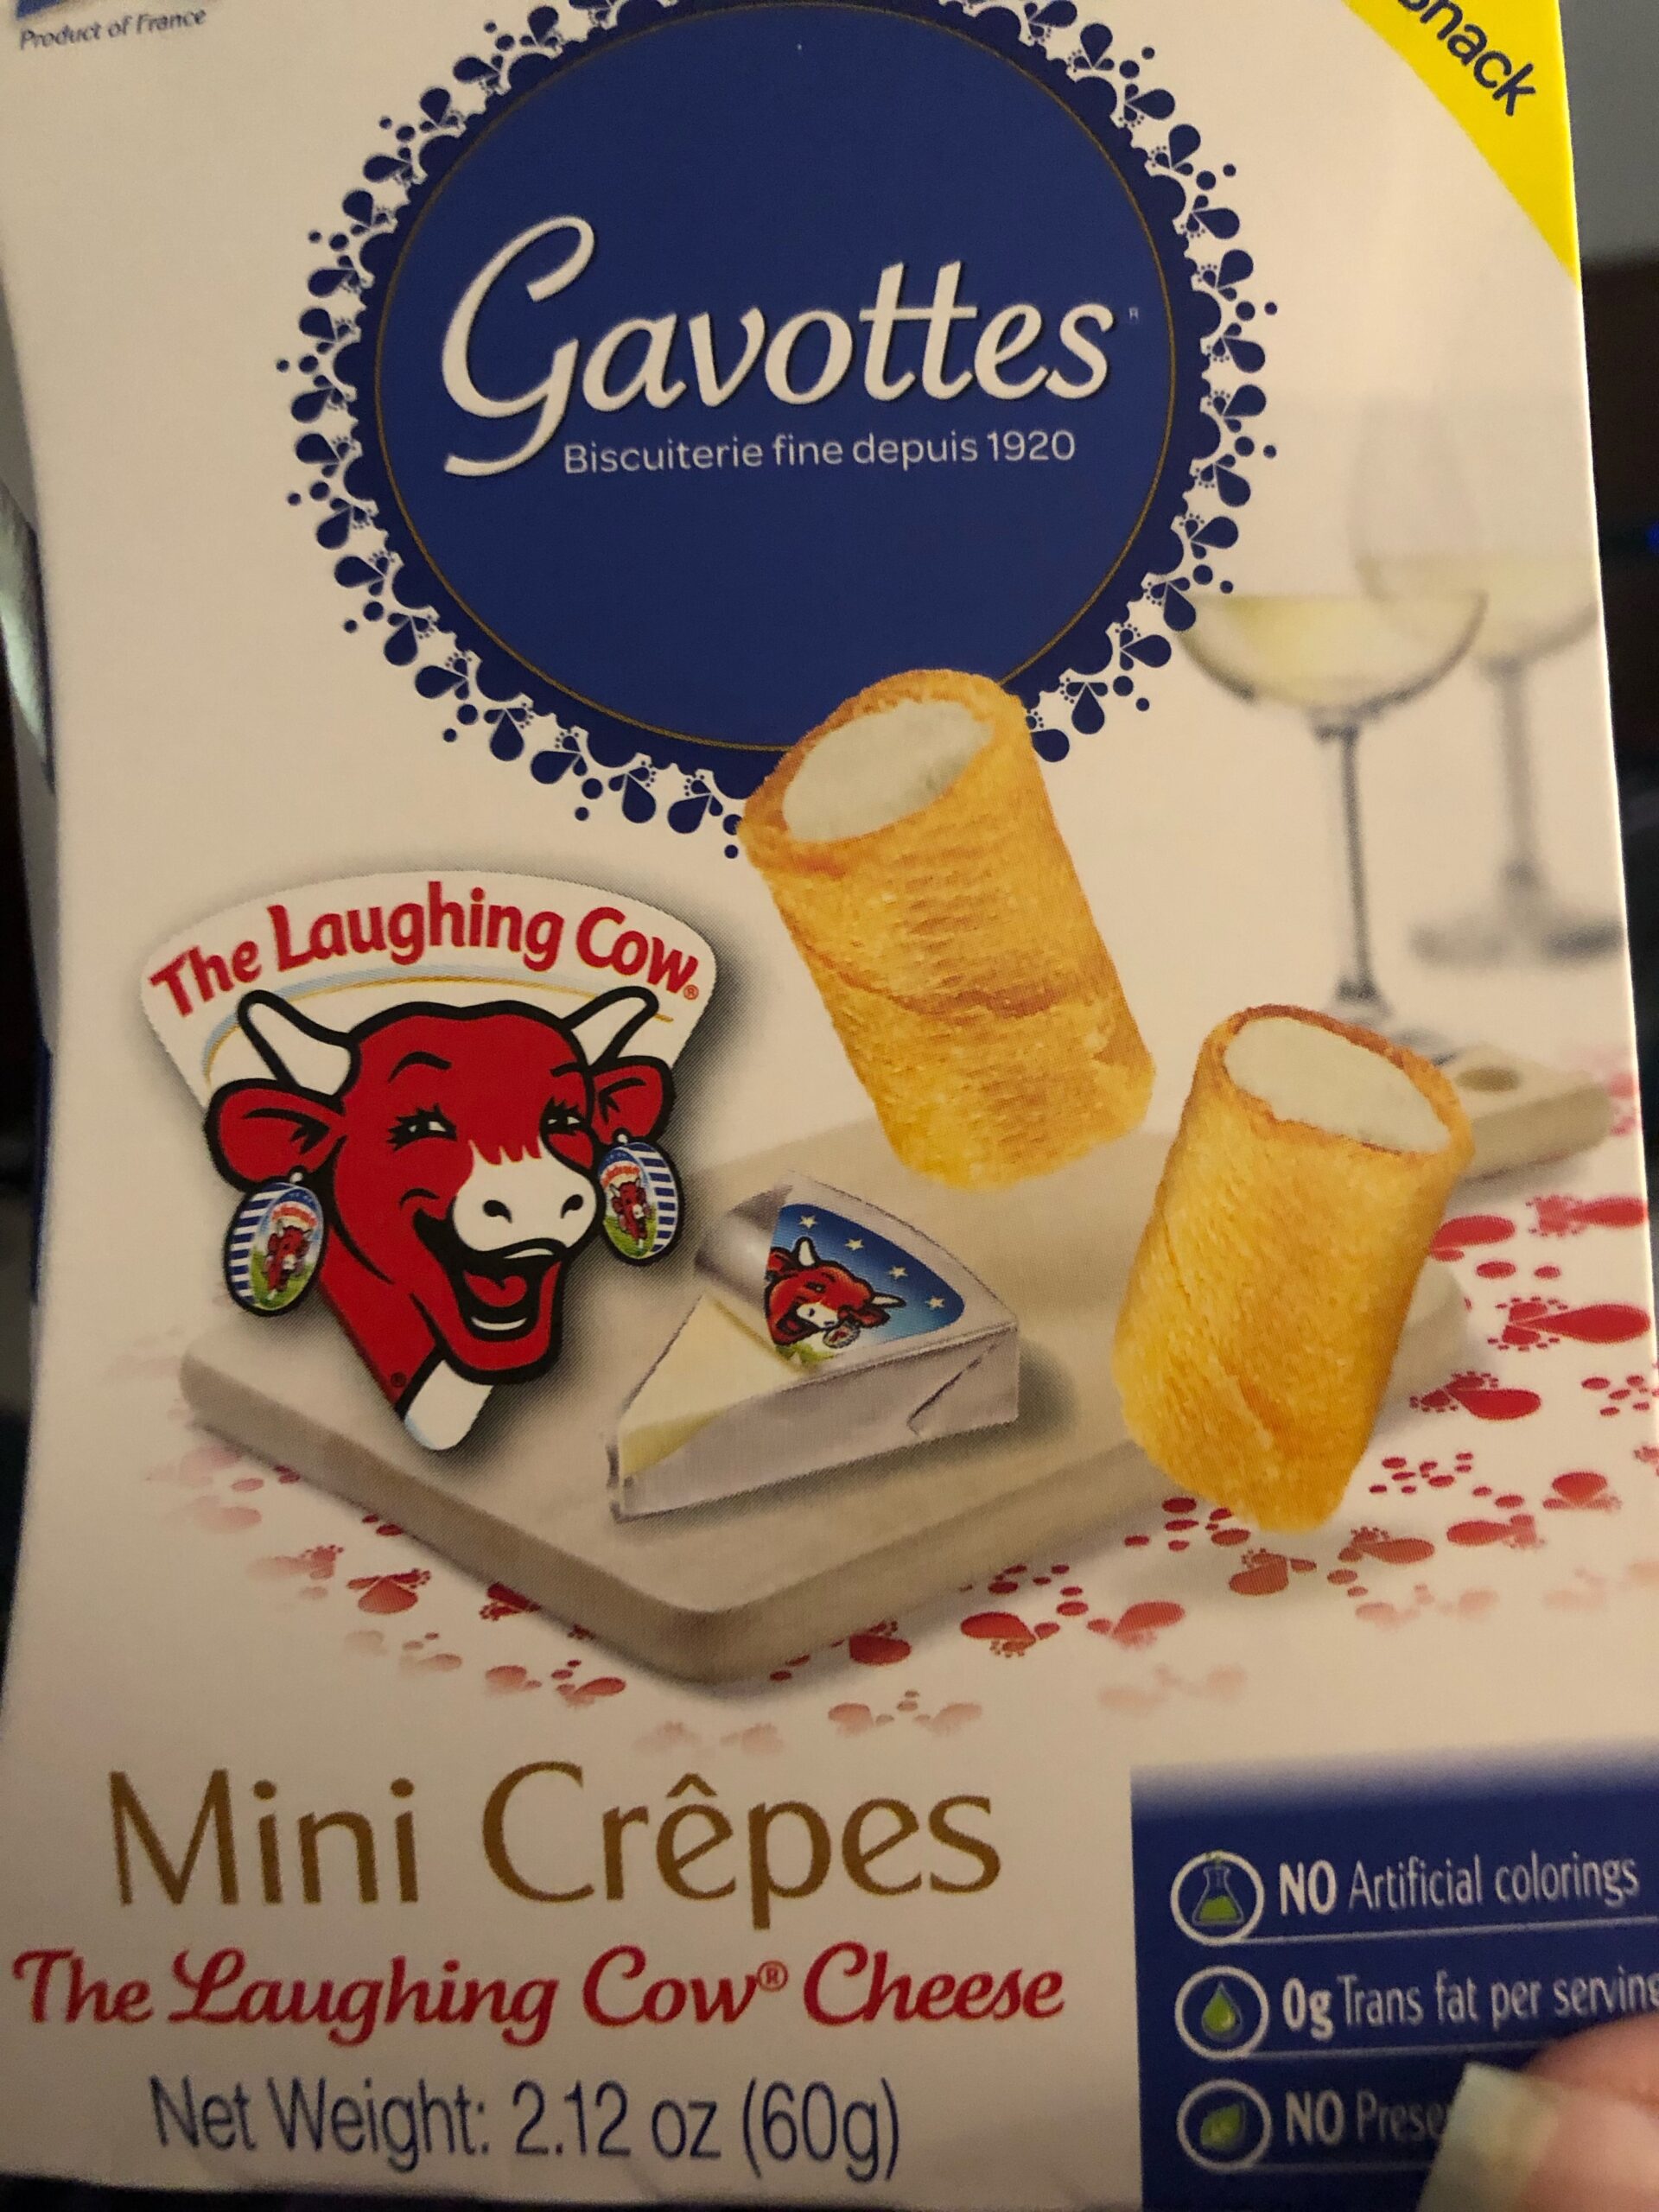 Gavottes Mini Crepes With The Laughing Cow Cheese